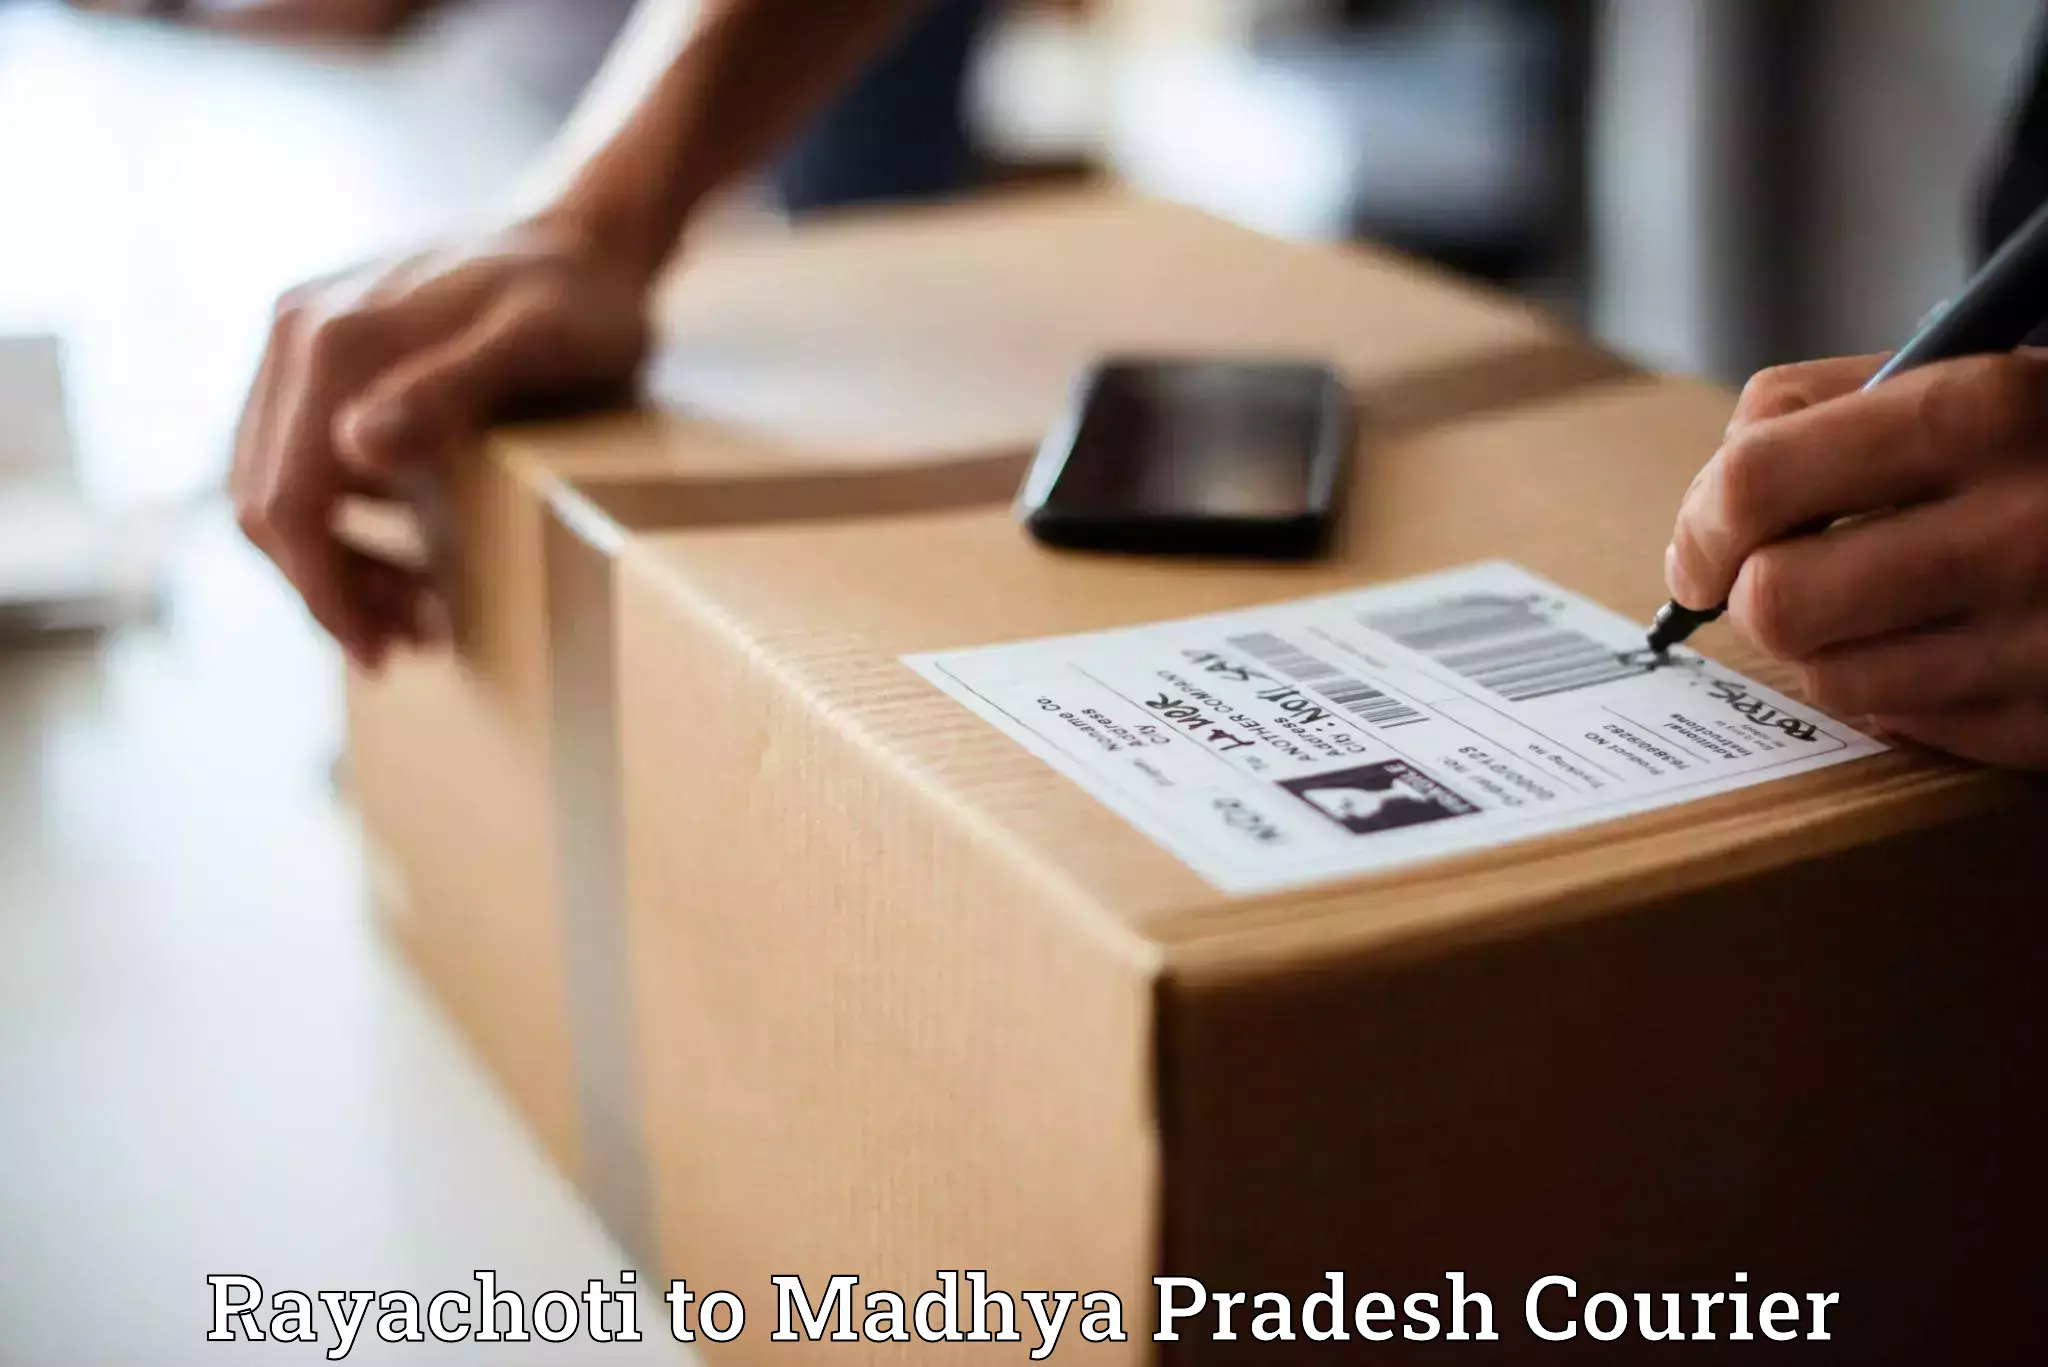 Courier service innovation Rayachoti to Indore